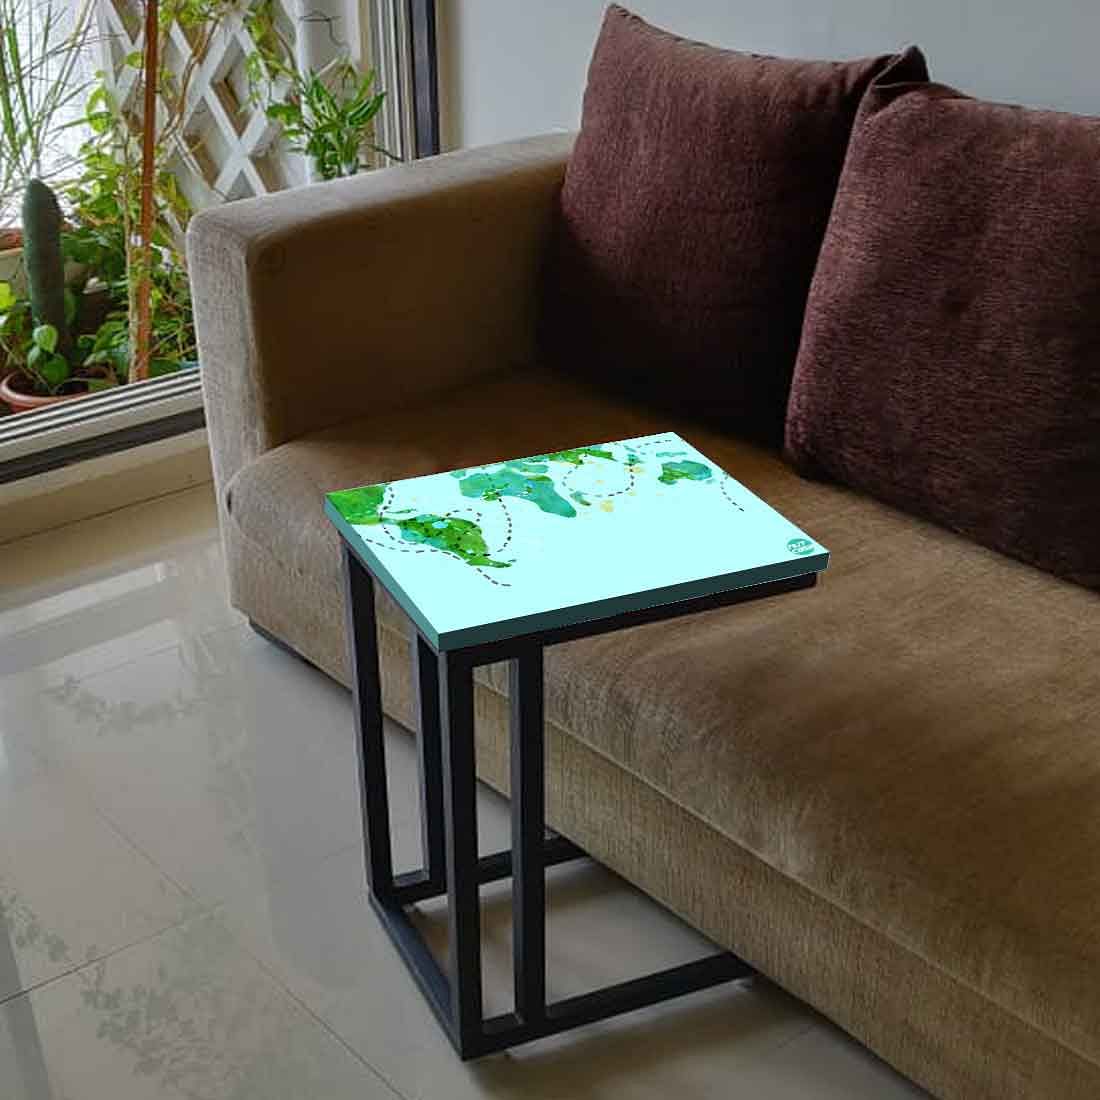 Nutcase Design C Shaped Side Table for Laptop Work on Sofa Couch-Study Breakfast Snack Serving End Tables -_Sky Blue Map Design Nutcase